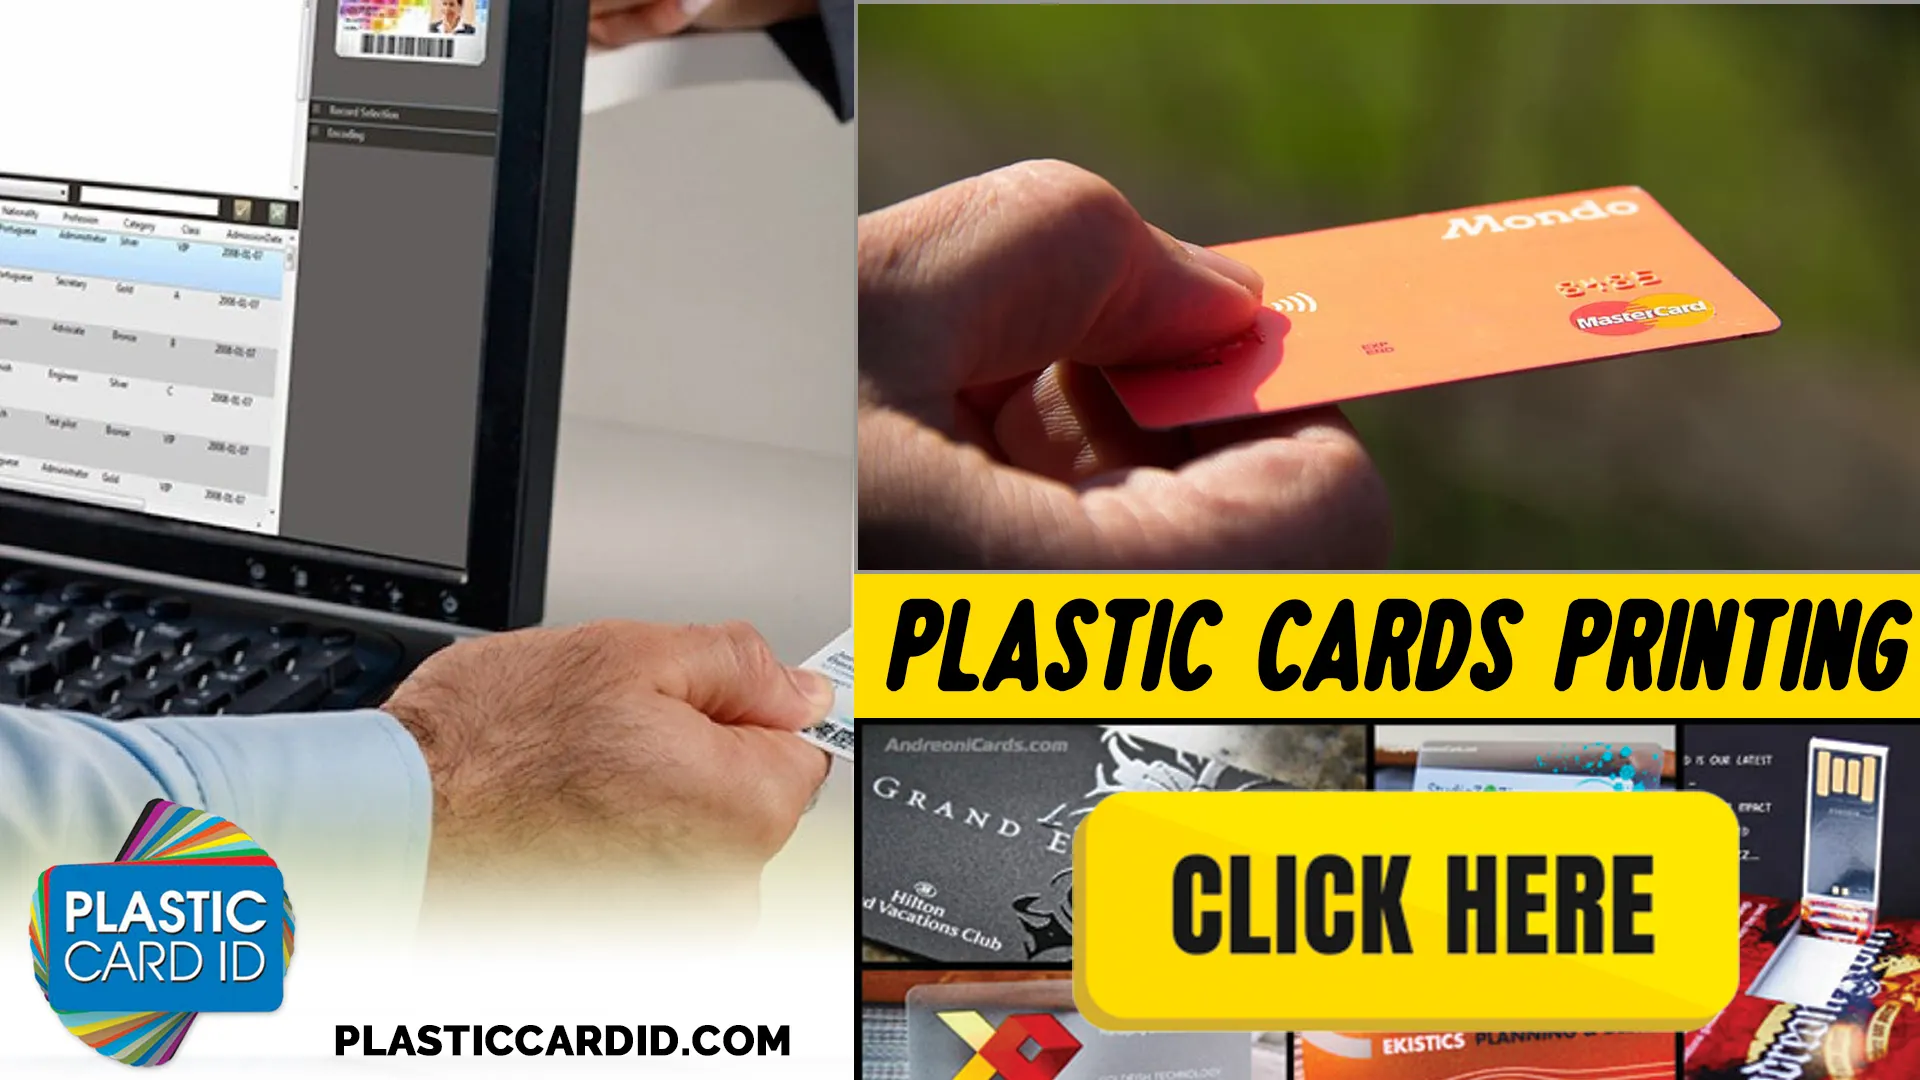 Welcome to the world of pristine plastic cards with Plastic Card ID




